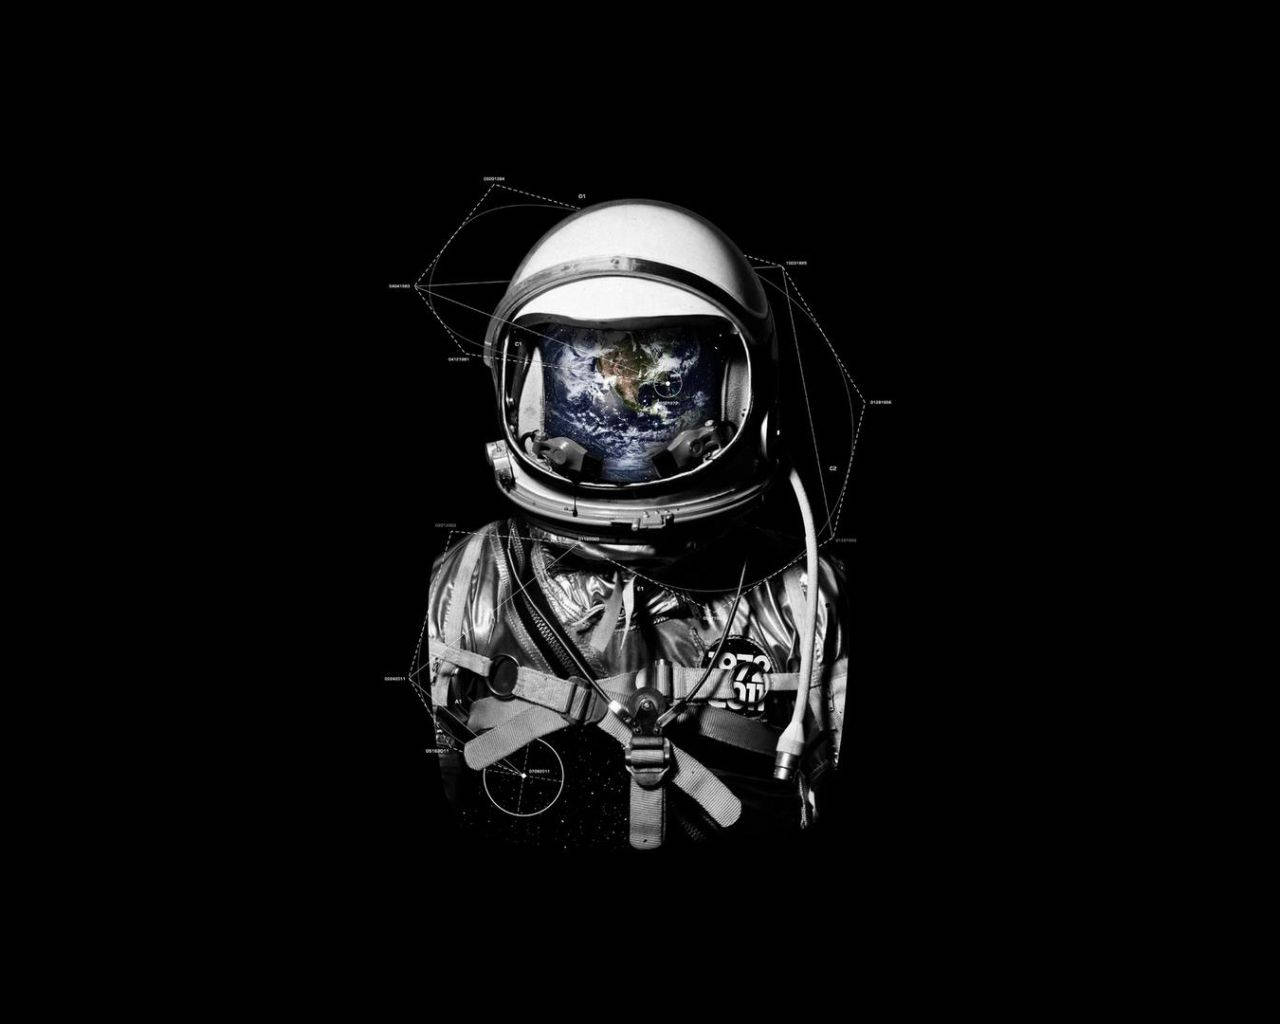 An astronaut in space suit with the Earth in the background - Astronaut